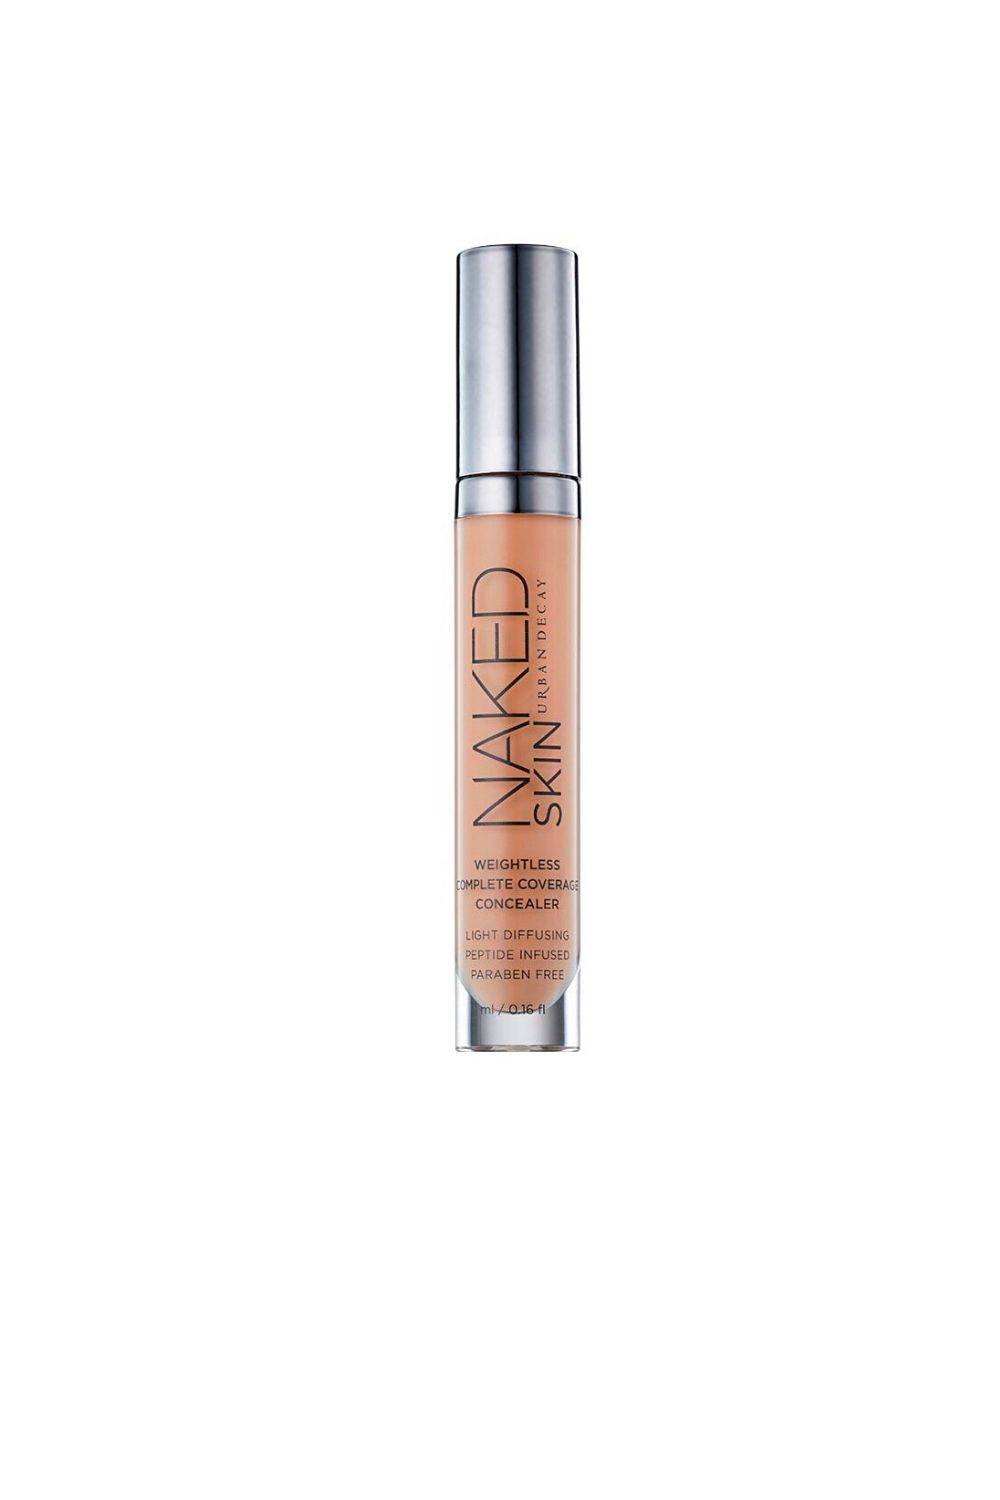 Corrector Naked Skin Weightless Complete Coverage Concealer Urban Decay